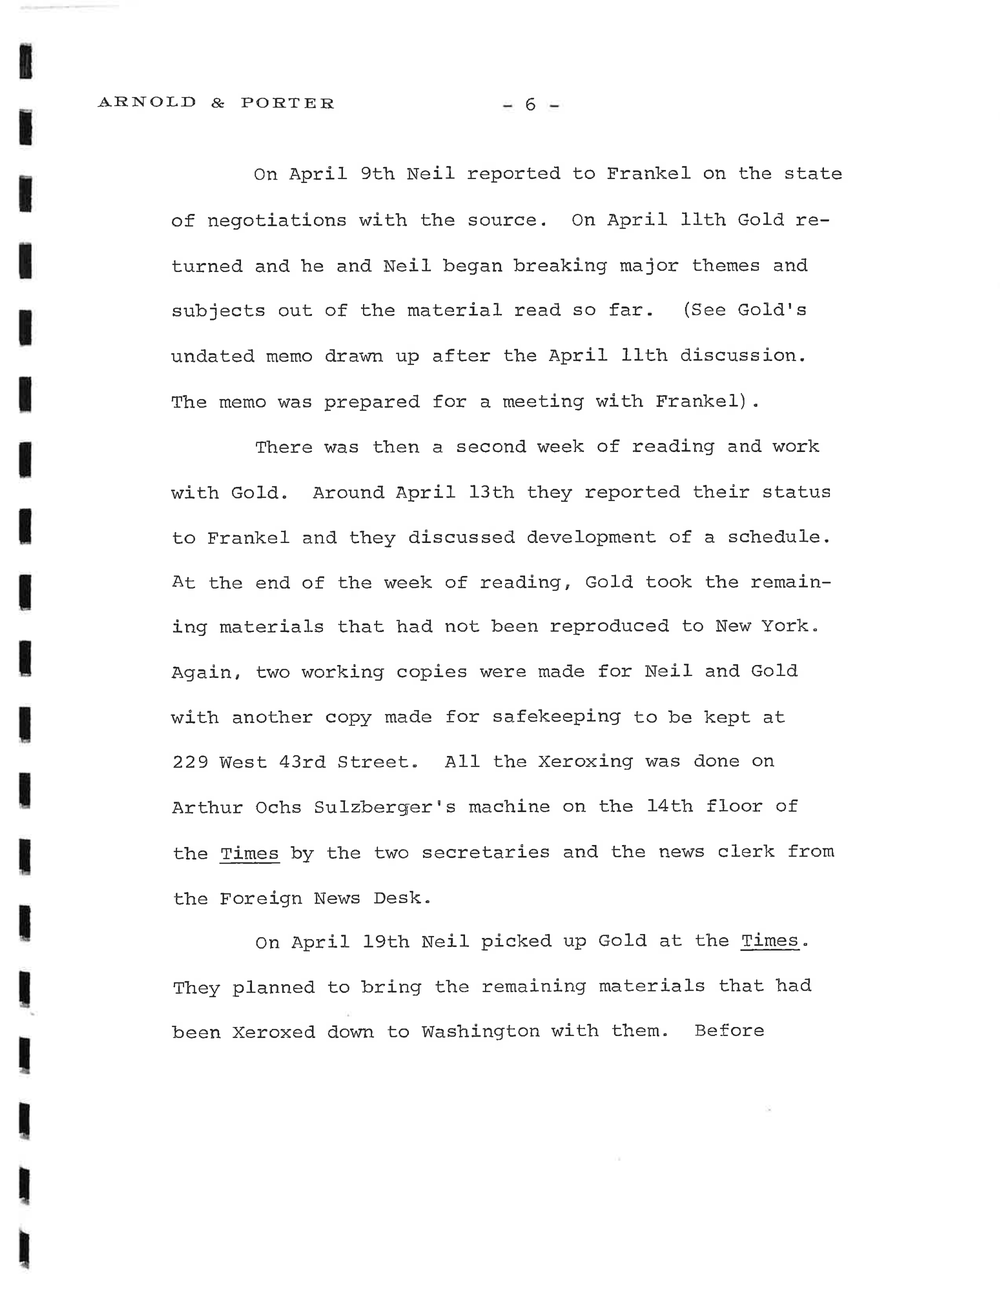 Page 6 from Rogovin Sheehan memo